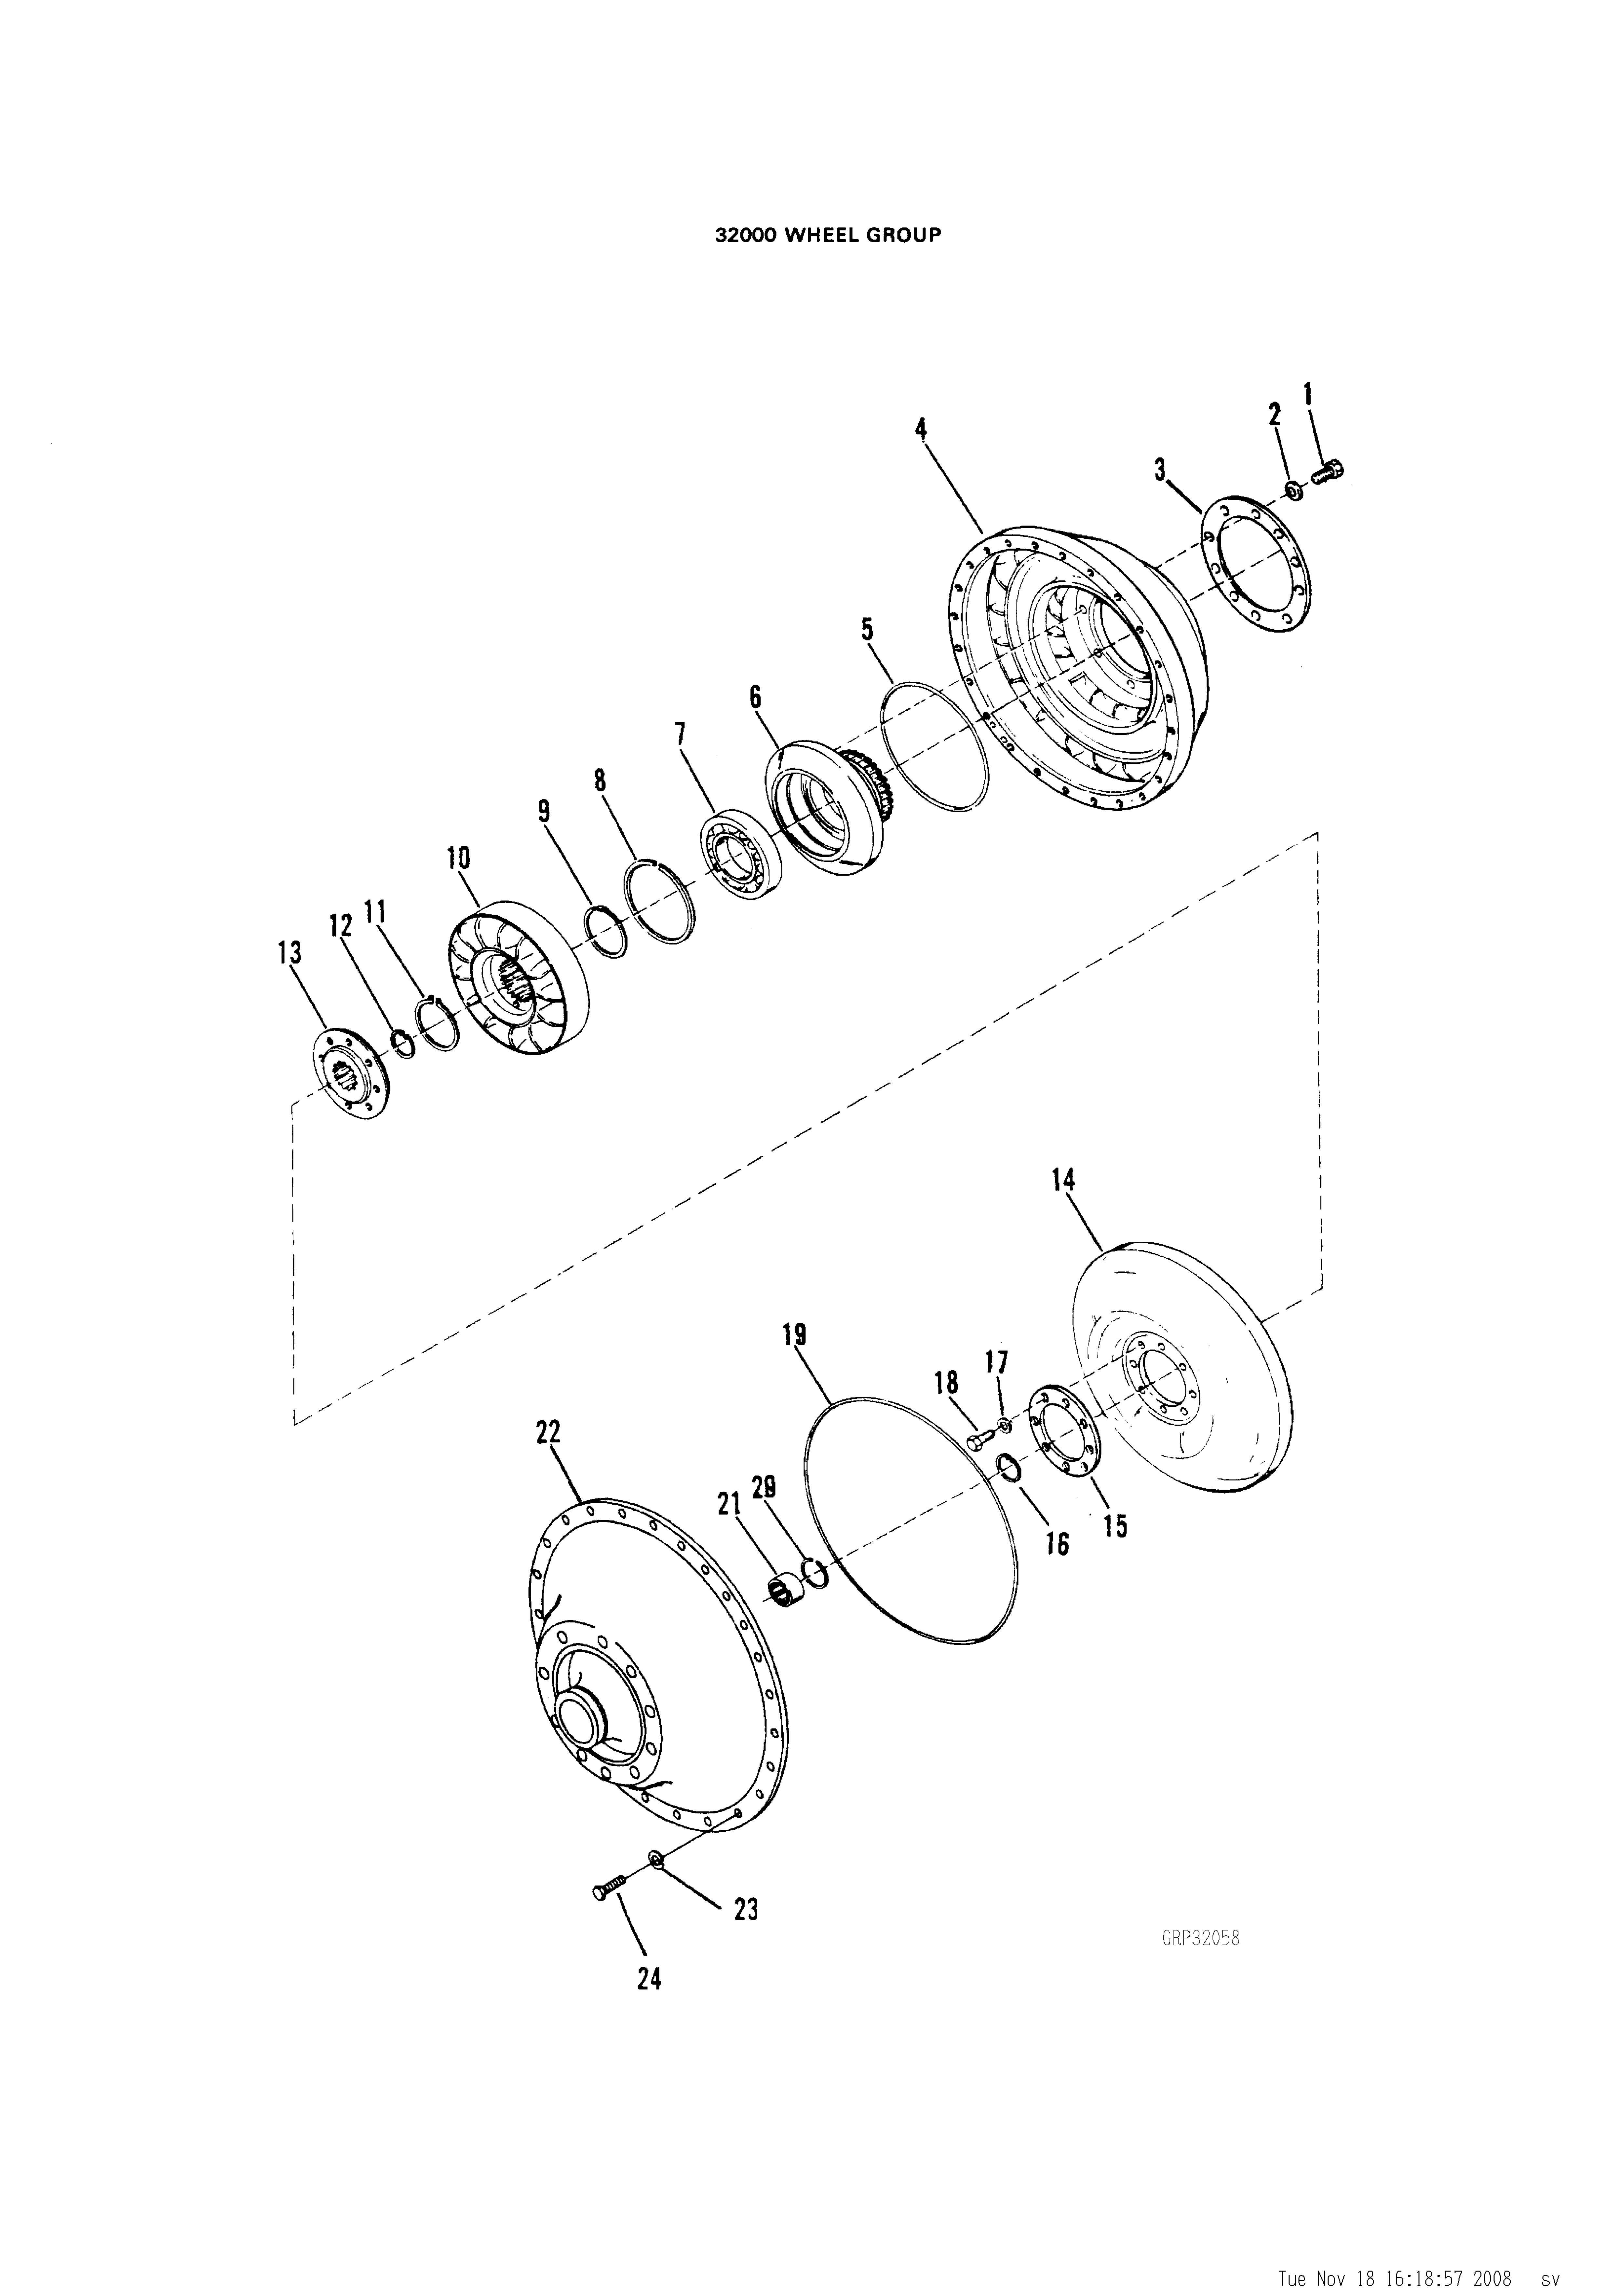 drawing for CNH NEW HOLLAND A18034 - HUB (figure 4)